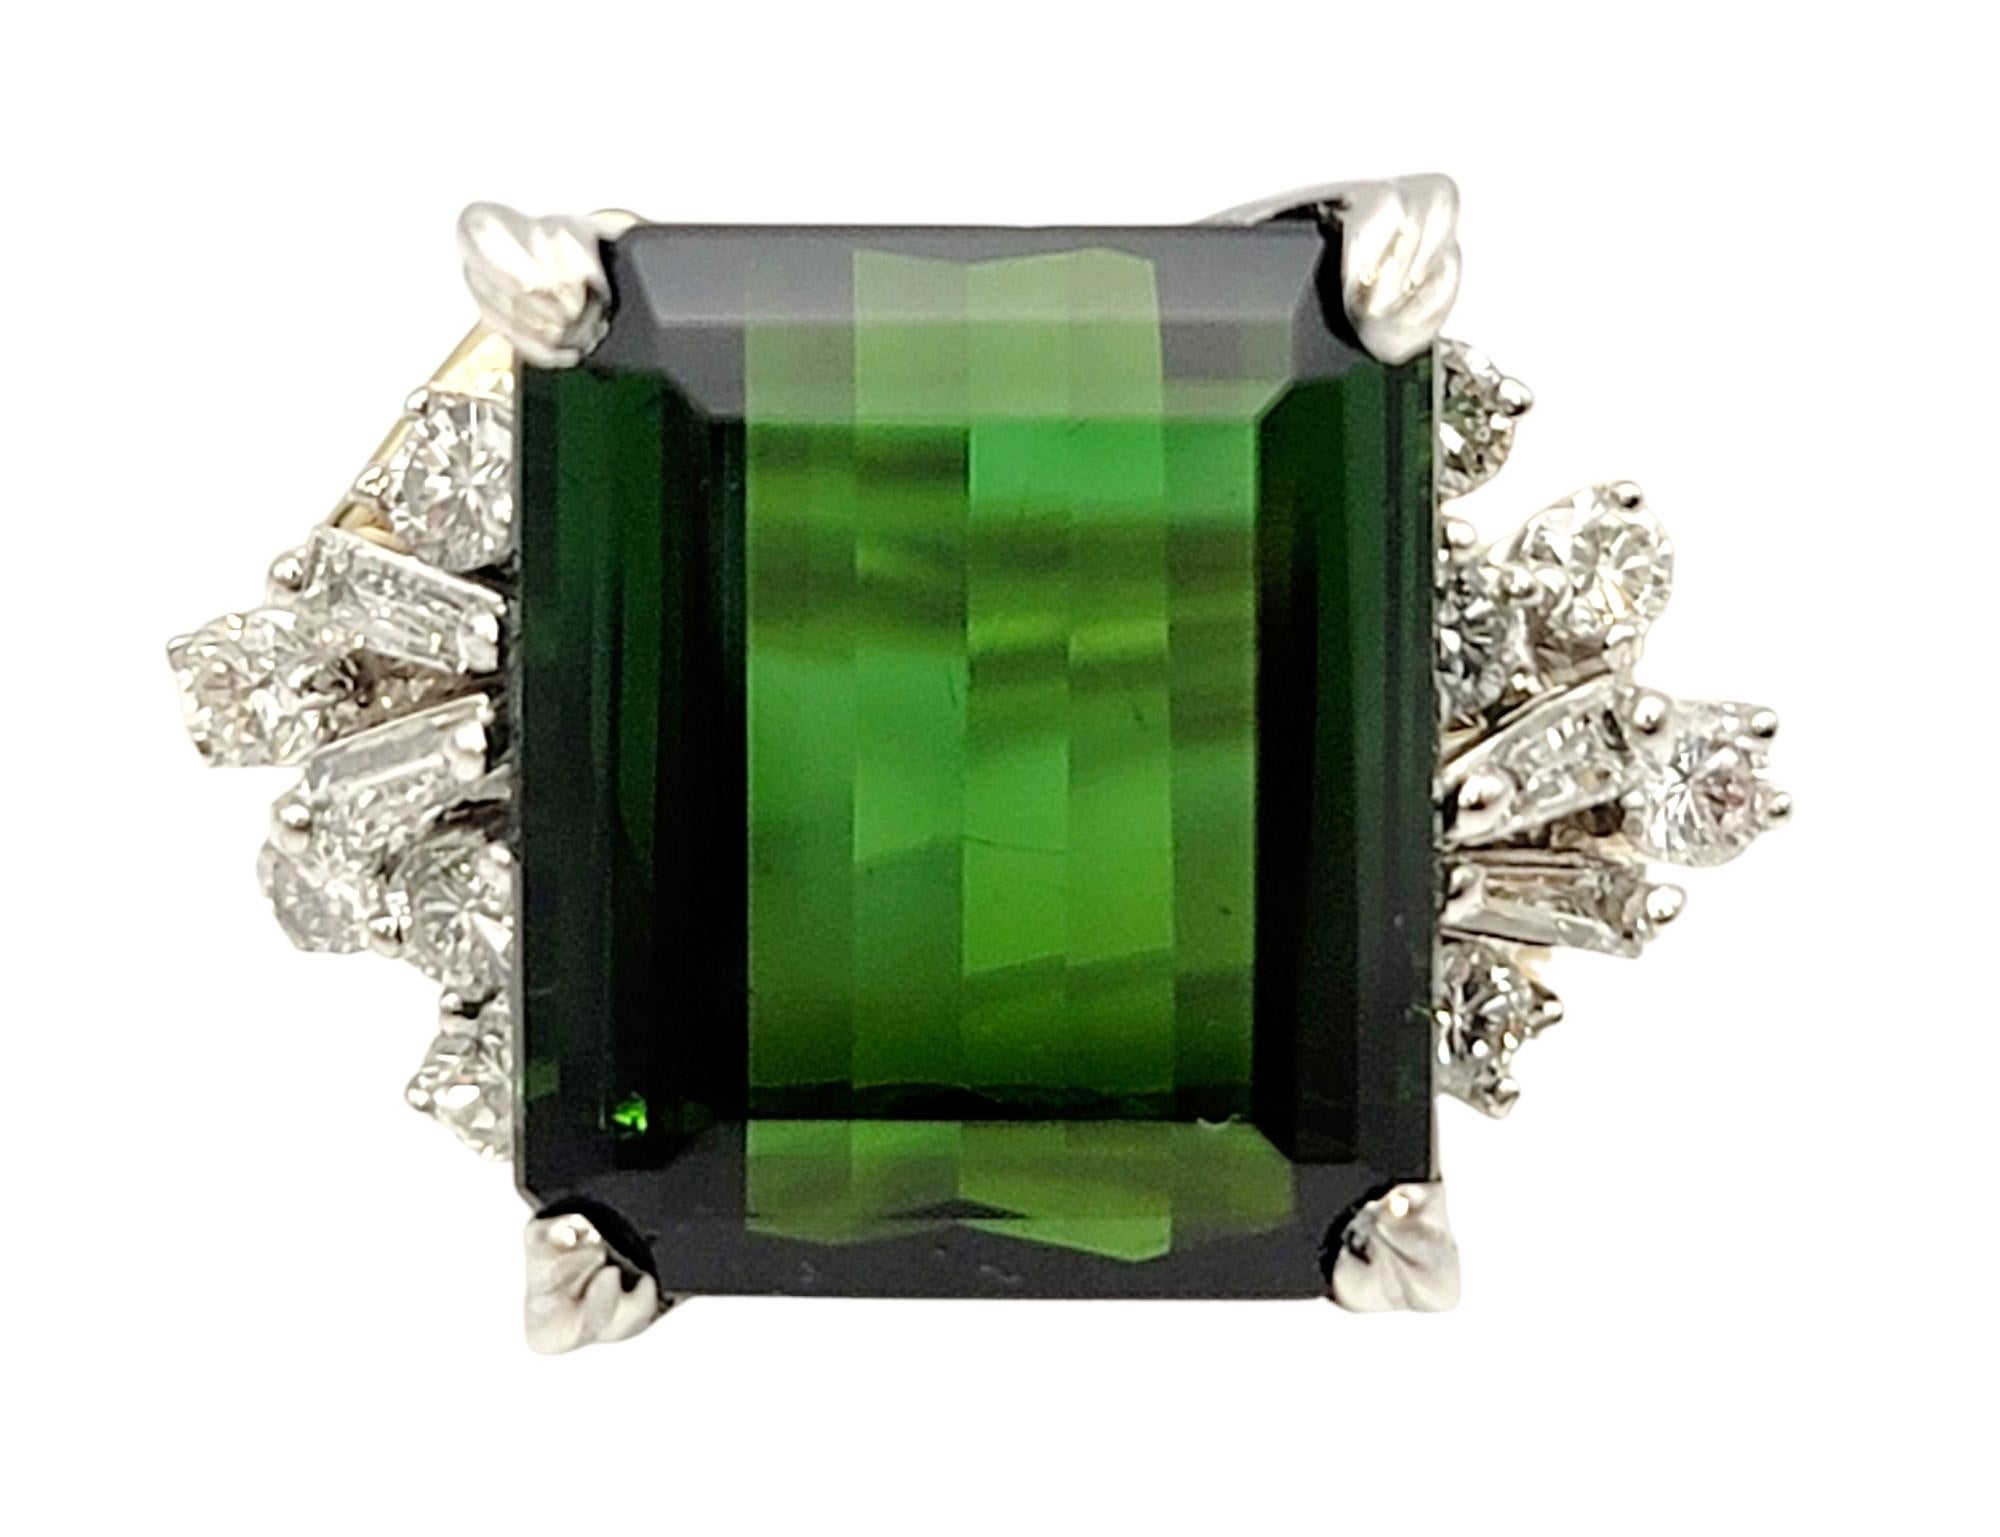 Ring size: 6

Breathtaking green tourmaline and diamond ring. The vibrant green hue of the emerald cut tourmaline pops against the icy white diamonds on either side, while the twisted yellow gold band adds a unique detail to the piece. The elongated